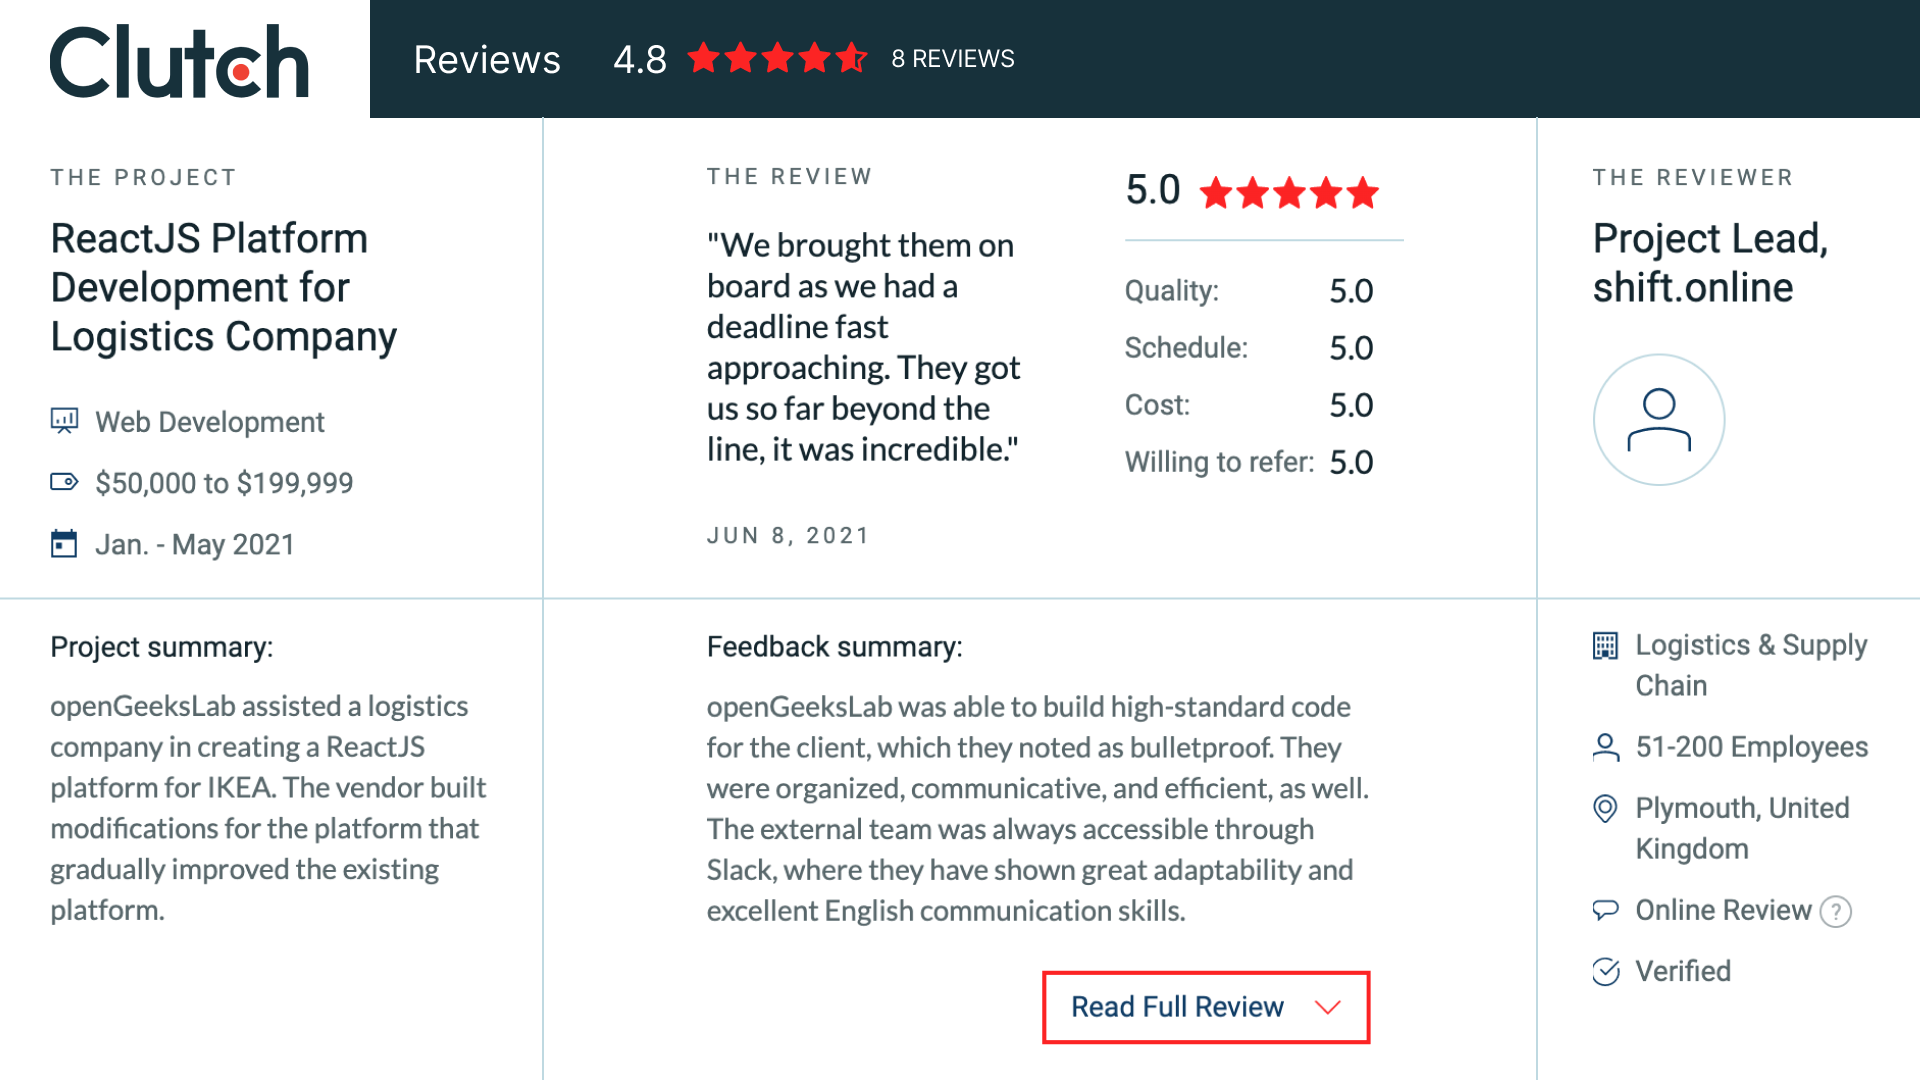 Client reviews are often a decision-making tool to hire app developers. In fact, you can get more information about a freelance developer or a dedicated team from a couple of client reviews than from their description. However, don’t make hiring decisions based only on reviews, sometimes they intentionally tell lies.